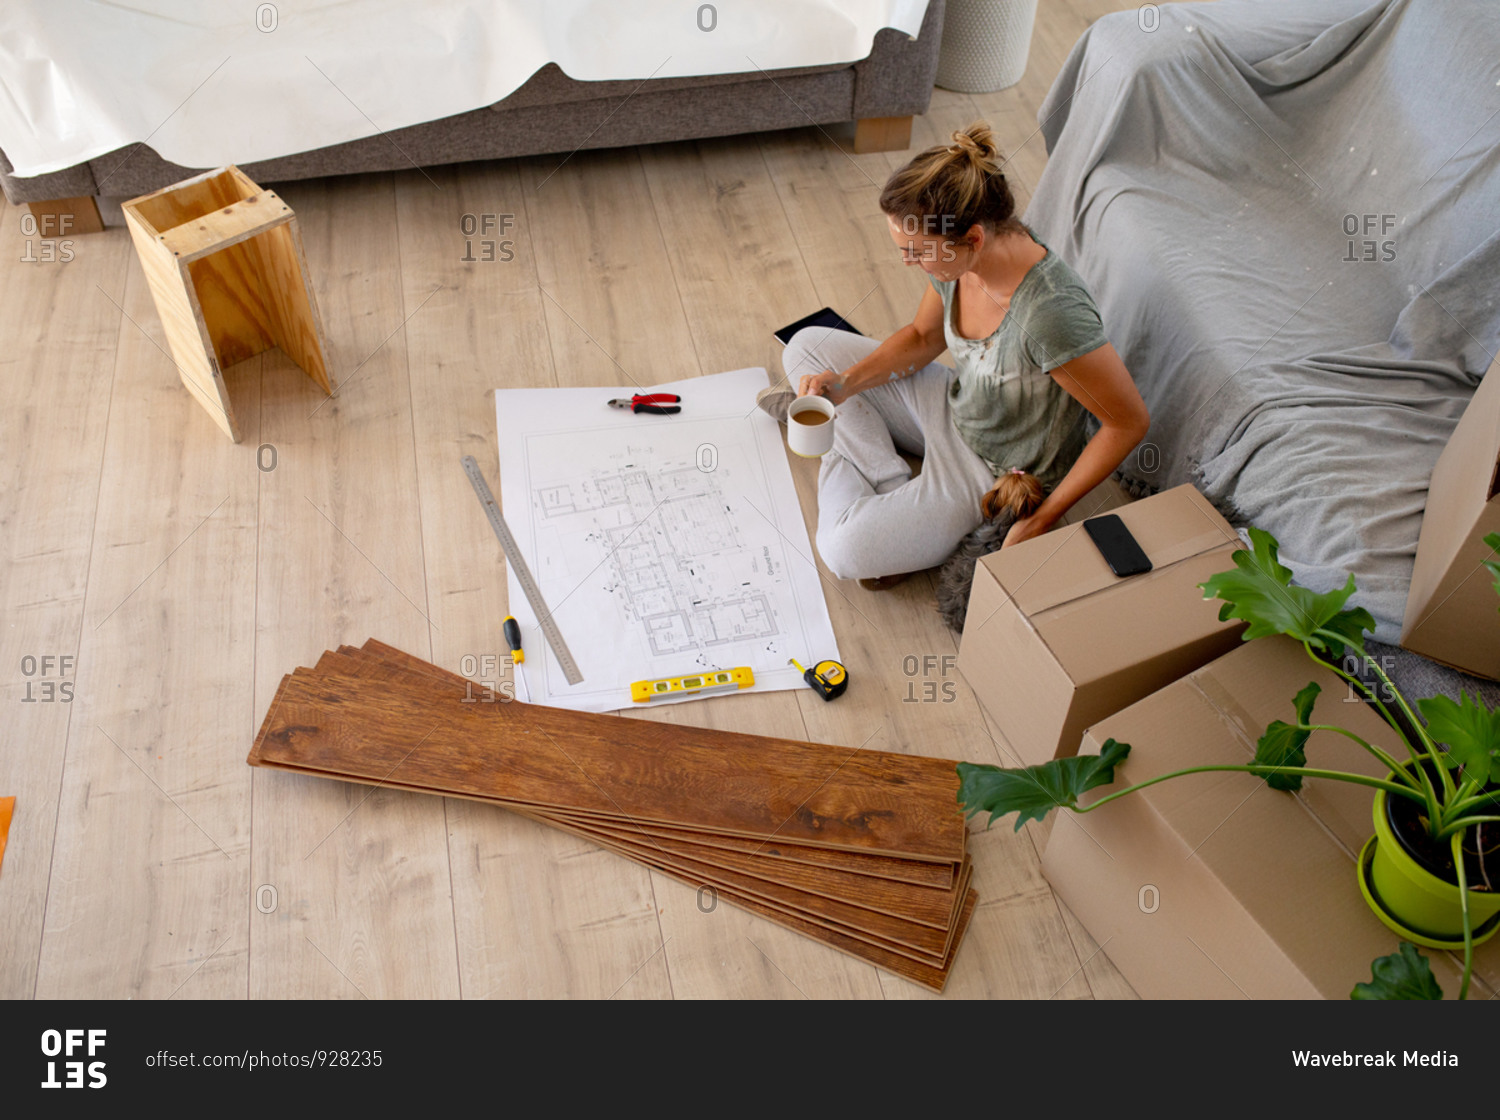 Caucasian woman spending time at home self isolating and social distancing in quarantine lockdown during coronavirus covid 19 epidemic, sitting on the floor with her dog, examining a plan of her home, holding a cup of coffee.